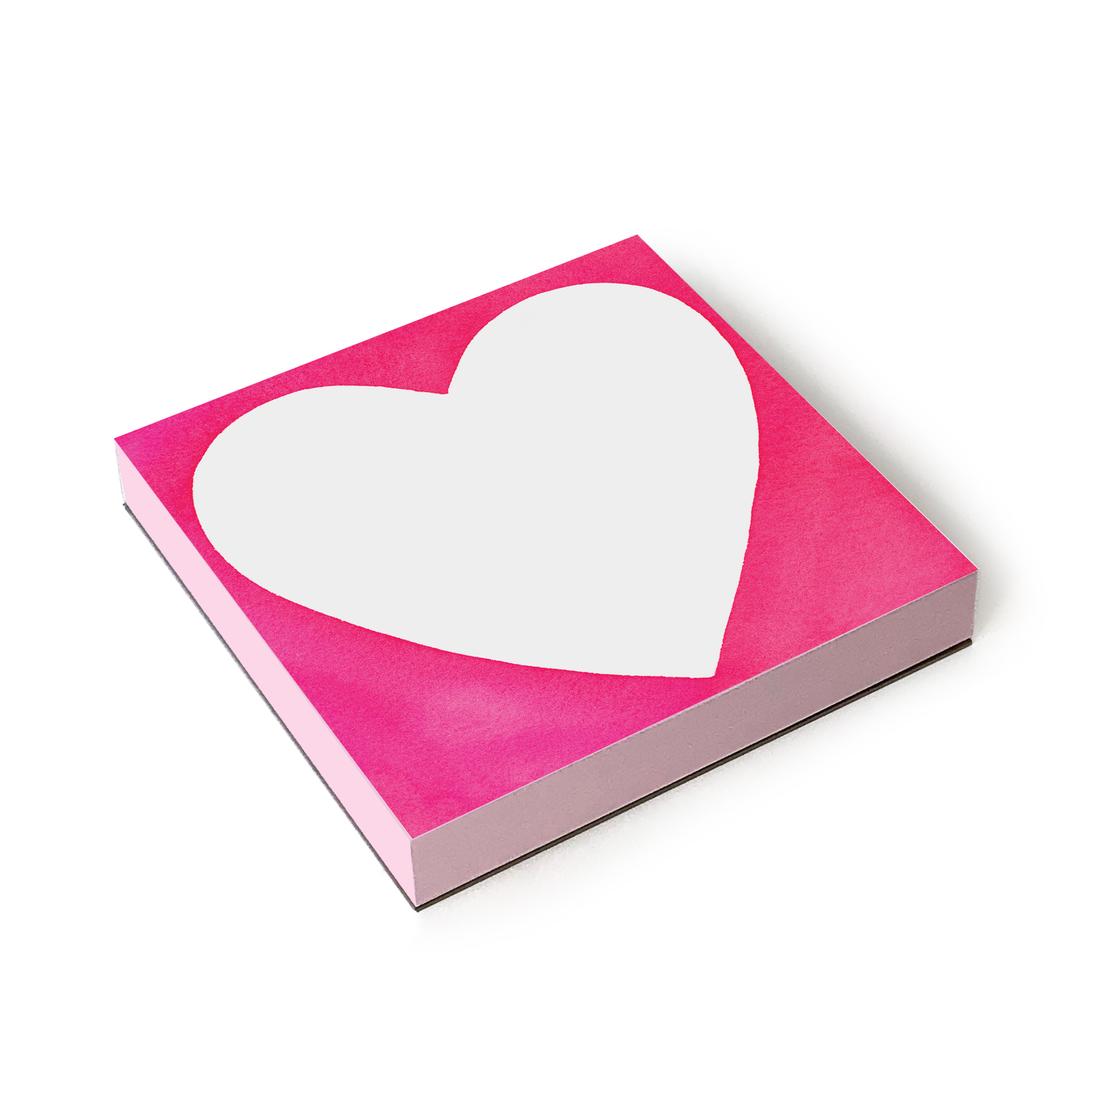 A long-lasting Chubby Heart Notepad by E. Frances on a white background with chunky notepads and pen and paper relationship.